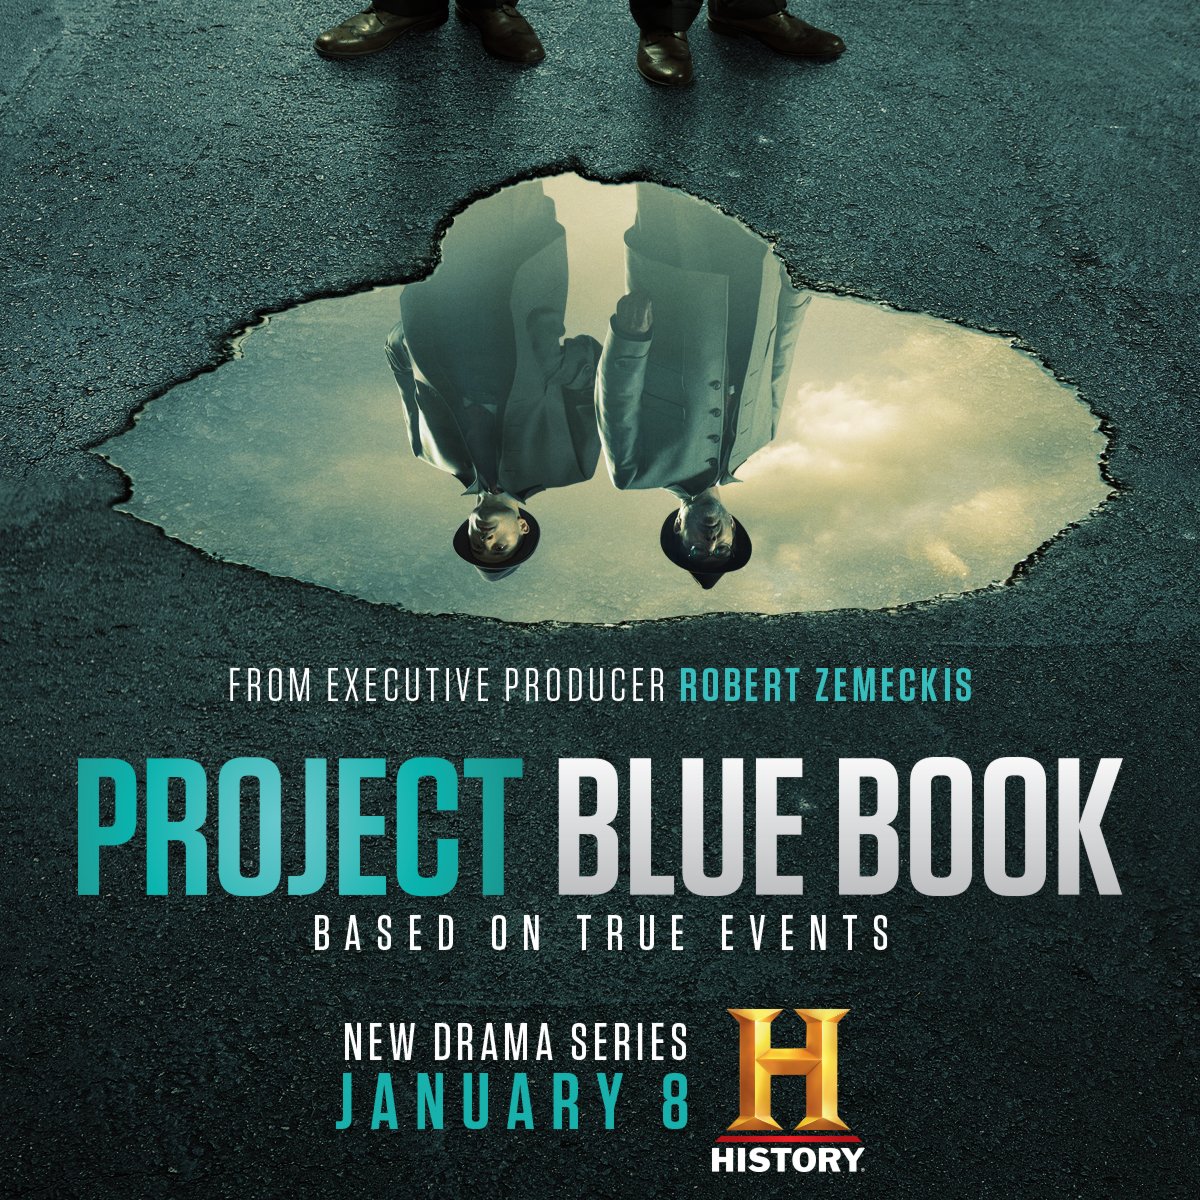 "PROJECT BLUE BOOK"